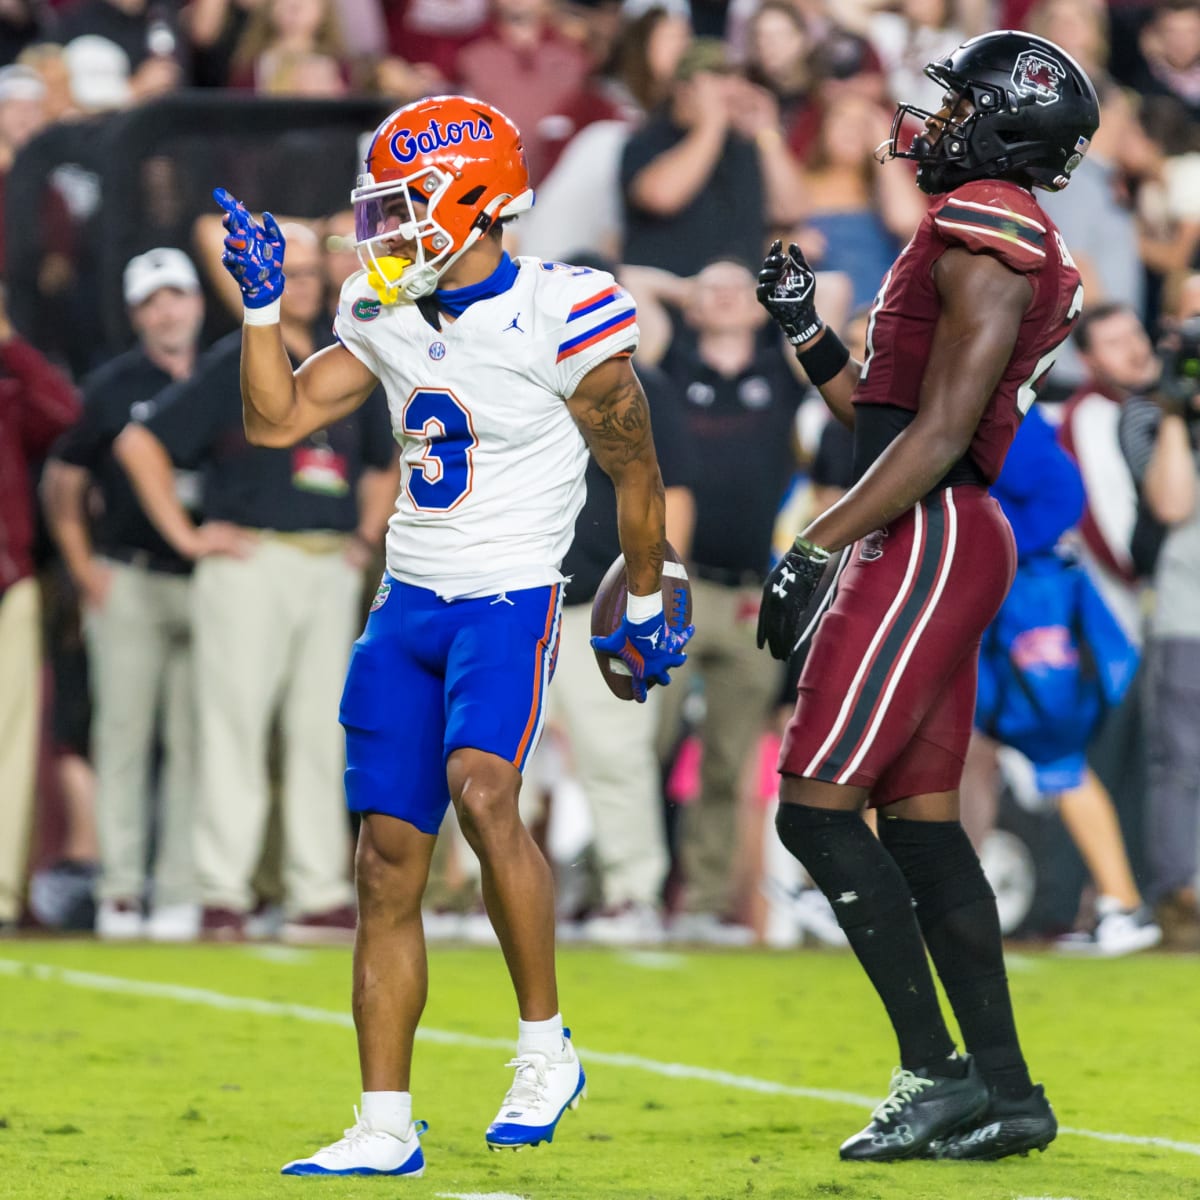 Florida's alligator uniforms: 10 things to know about these